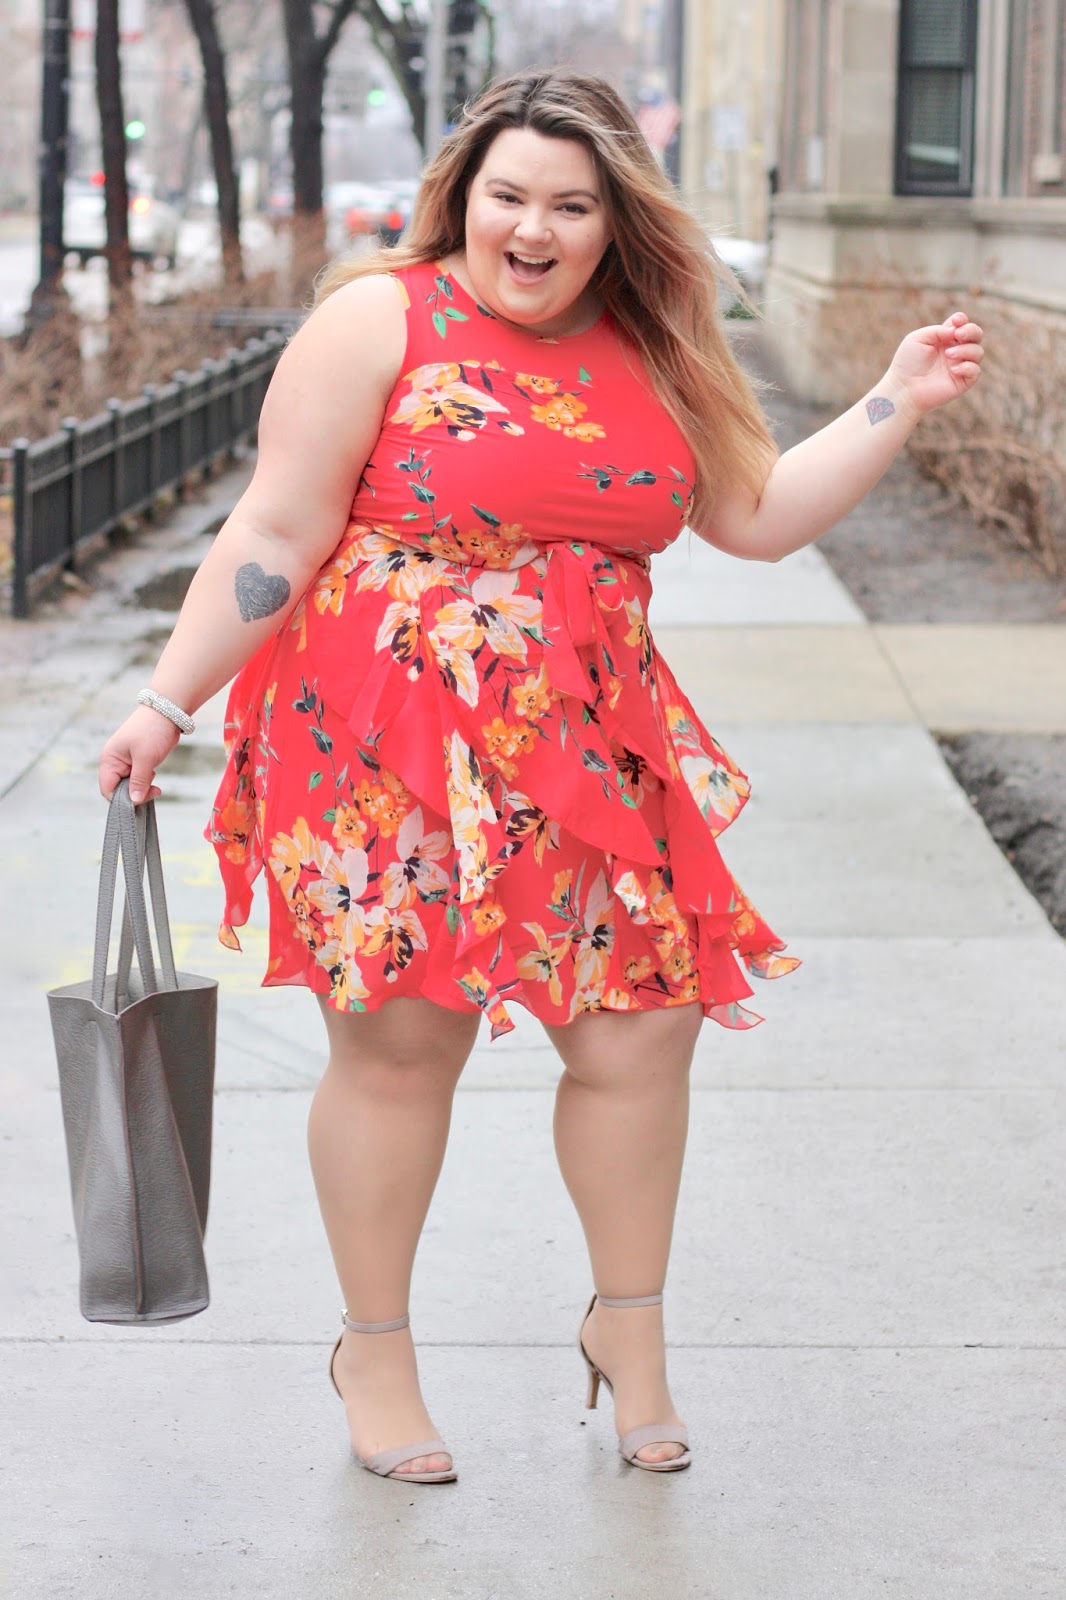 dressbarn, BELTED RUFFLED FLORAL DRESS, natalie craig, natalie in the city, Chicago blogger, midwest, florals for spring, how to mix spring and winter clothing, plus size dresses, plus size fashion blogger, plus size fashion for women, fatshion, plus size summer dresses, eloquii wool vest